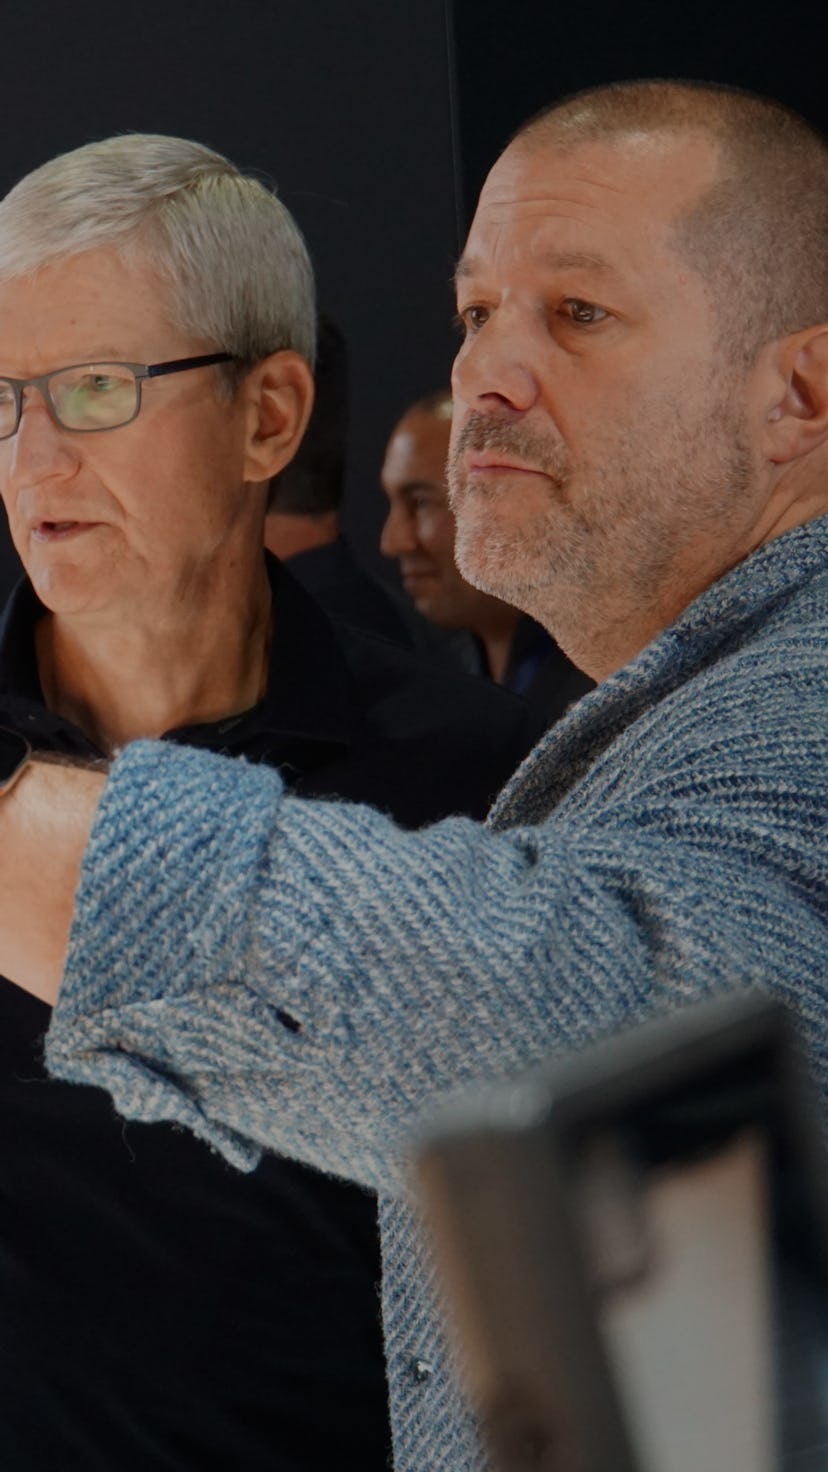 Apple CEO Tim Cook and Jony Ive confused at products.